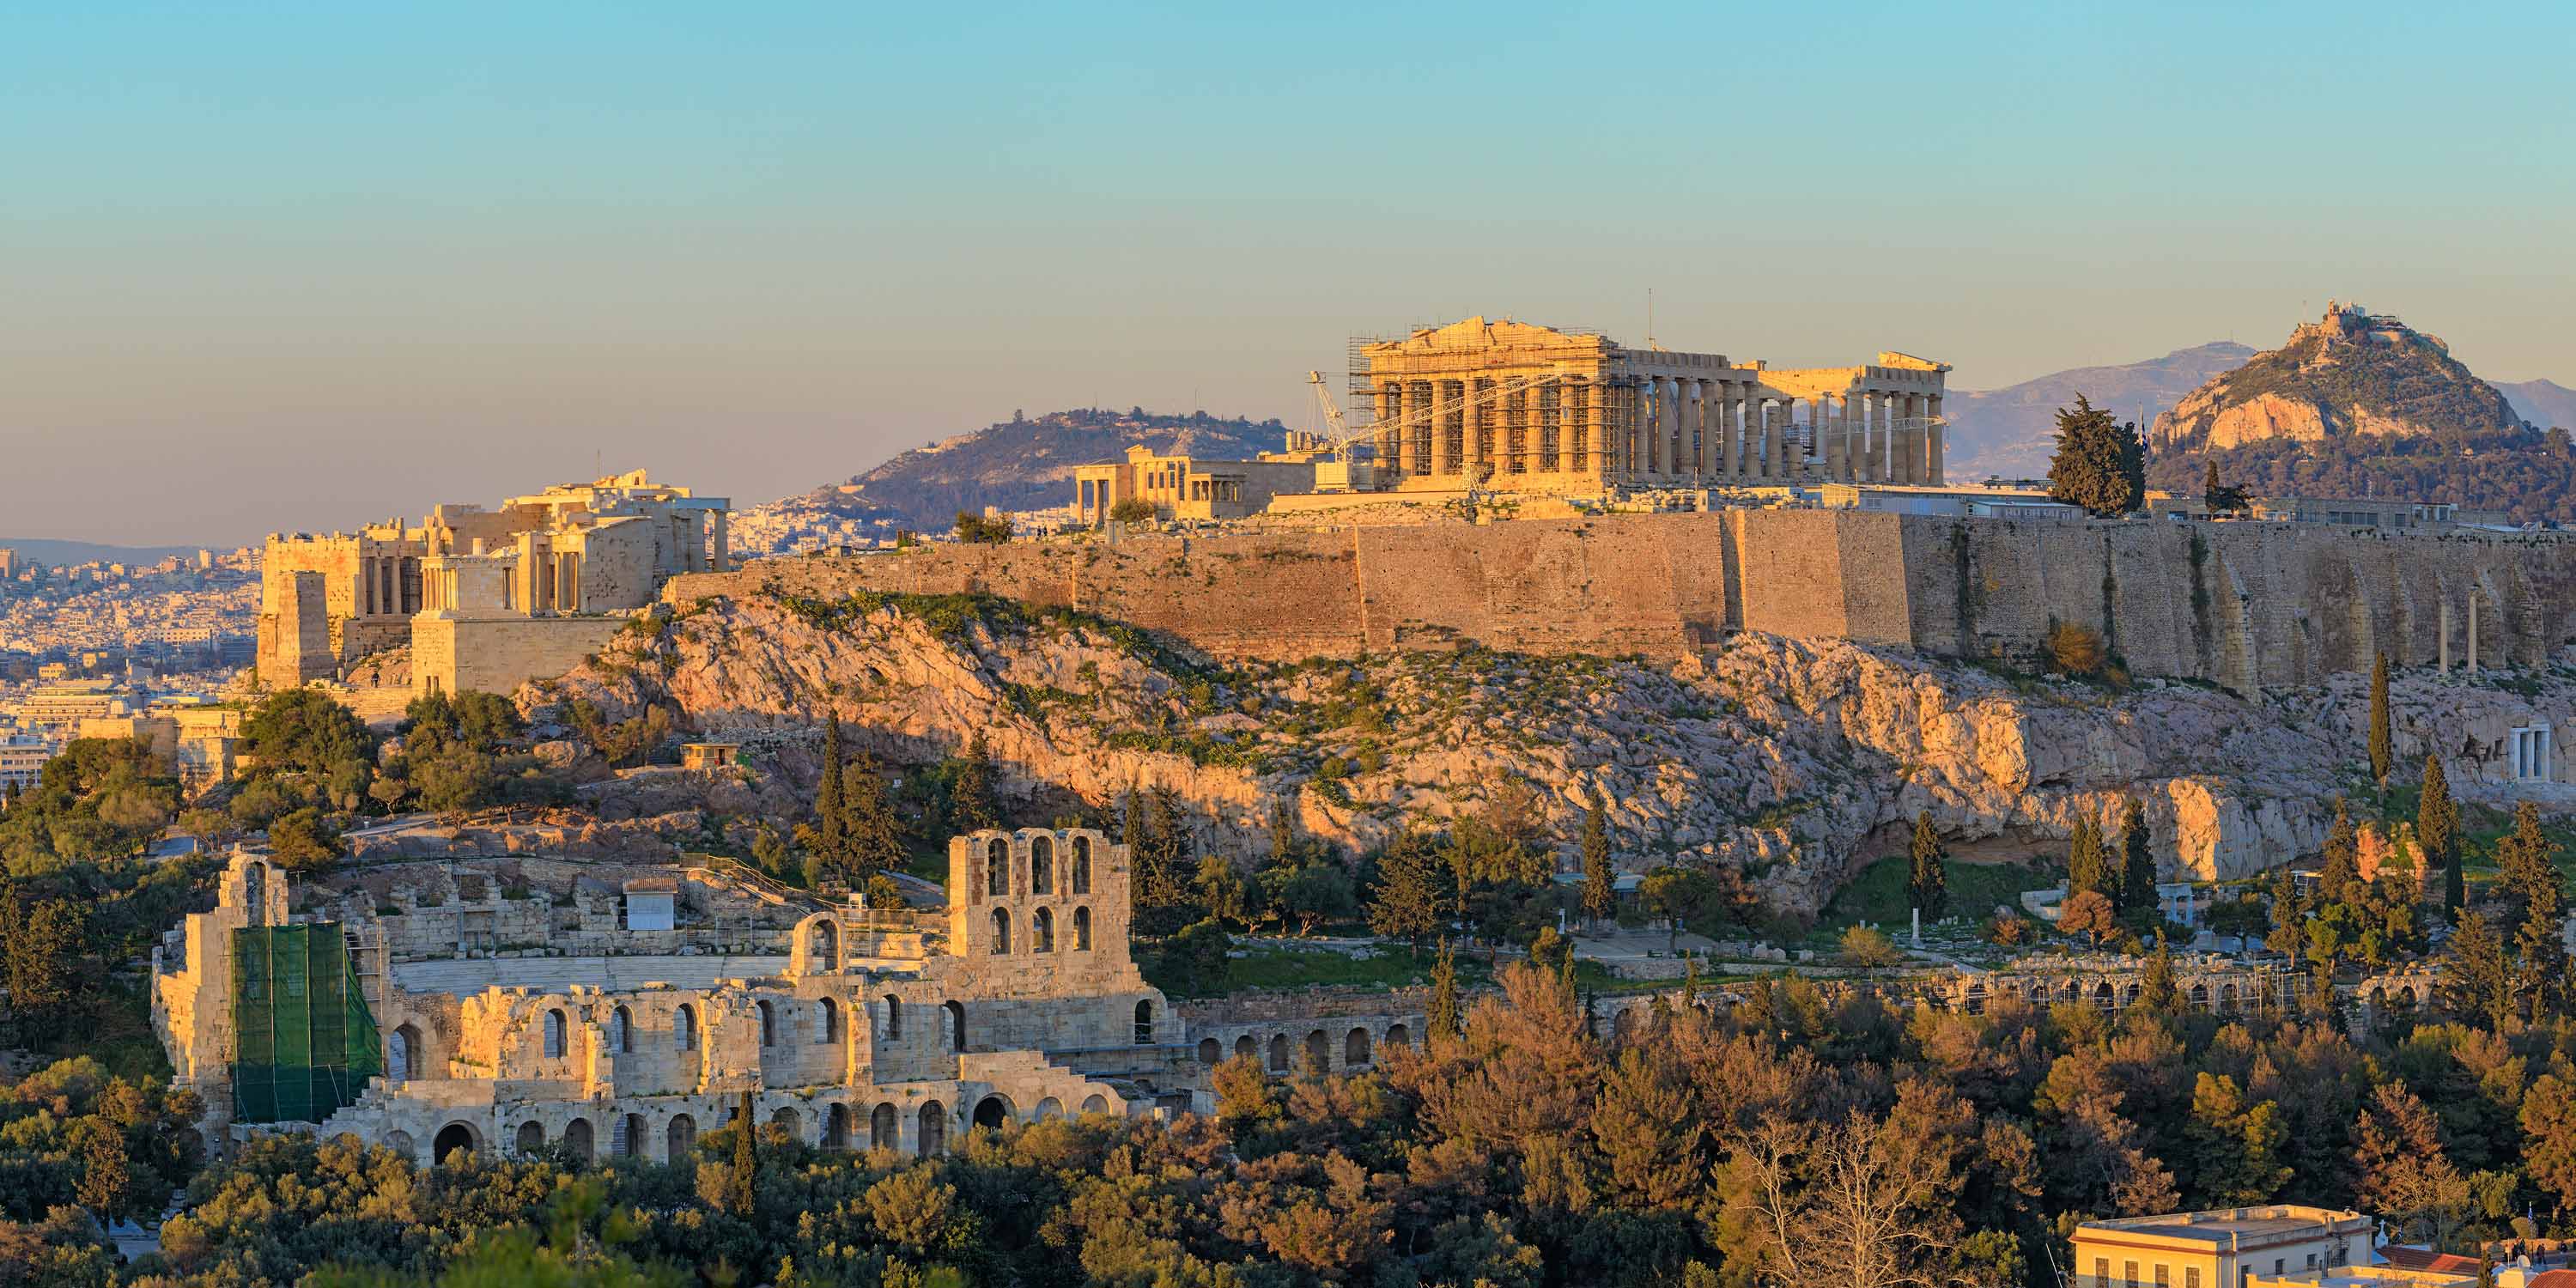 overview of the acropolis of Athens at dusk